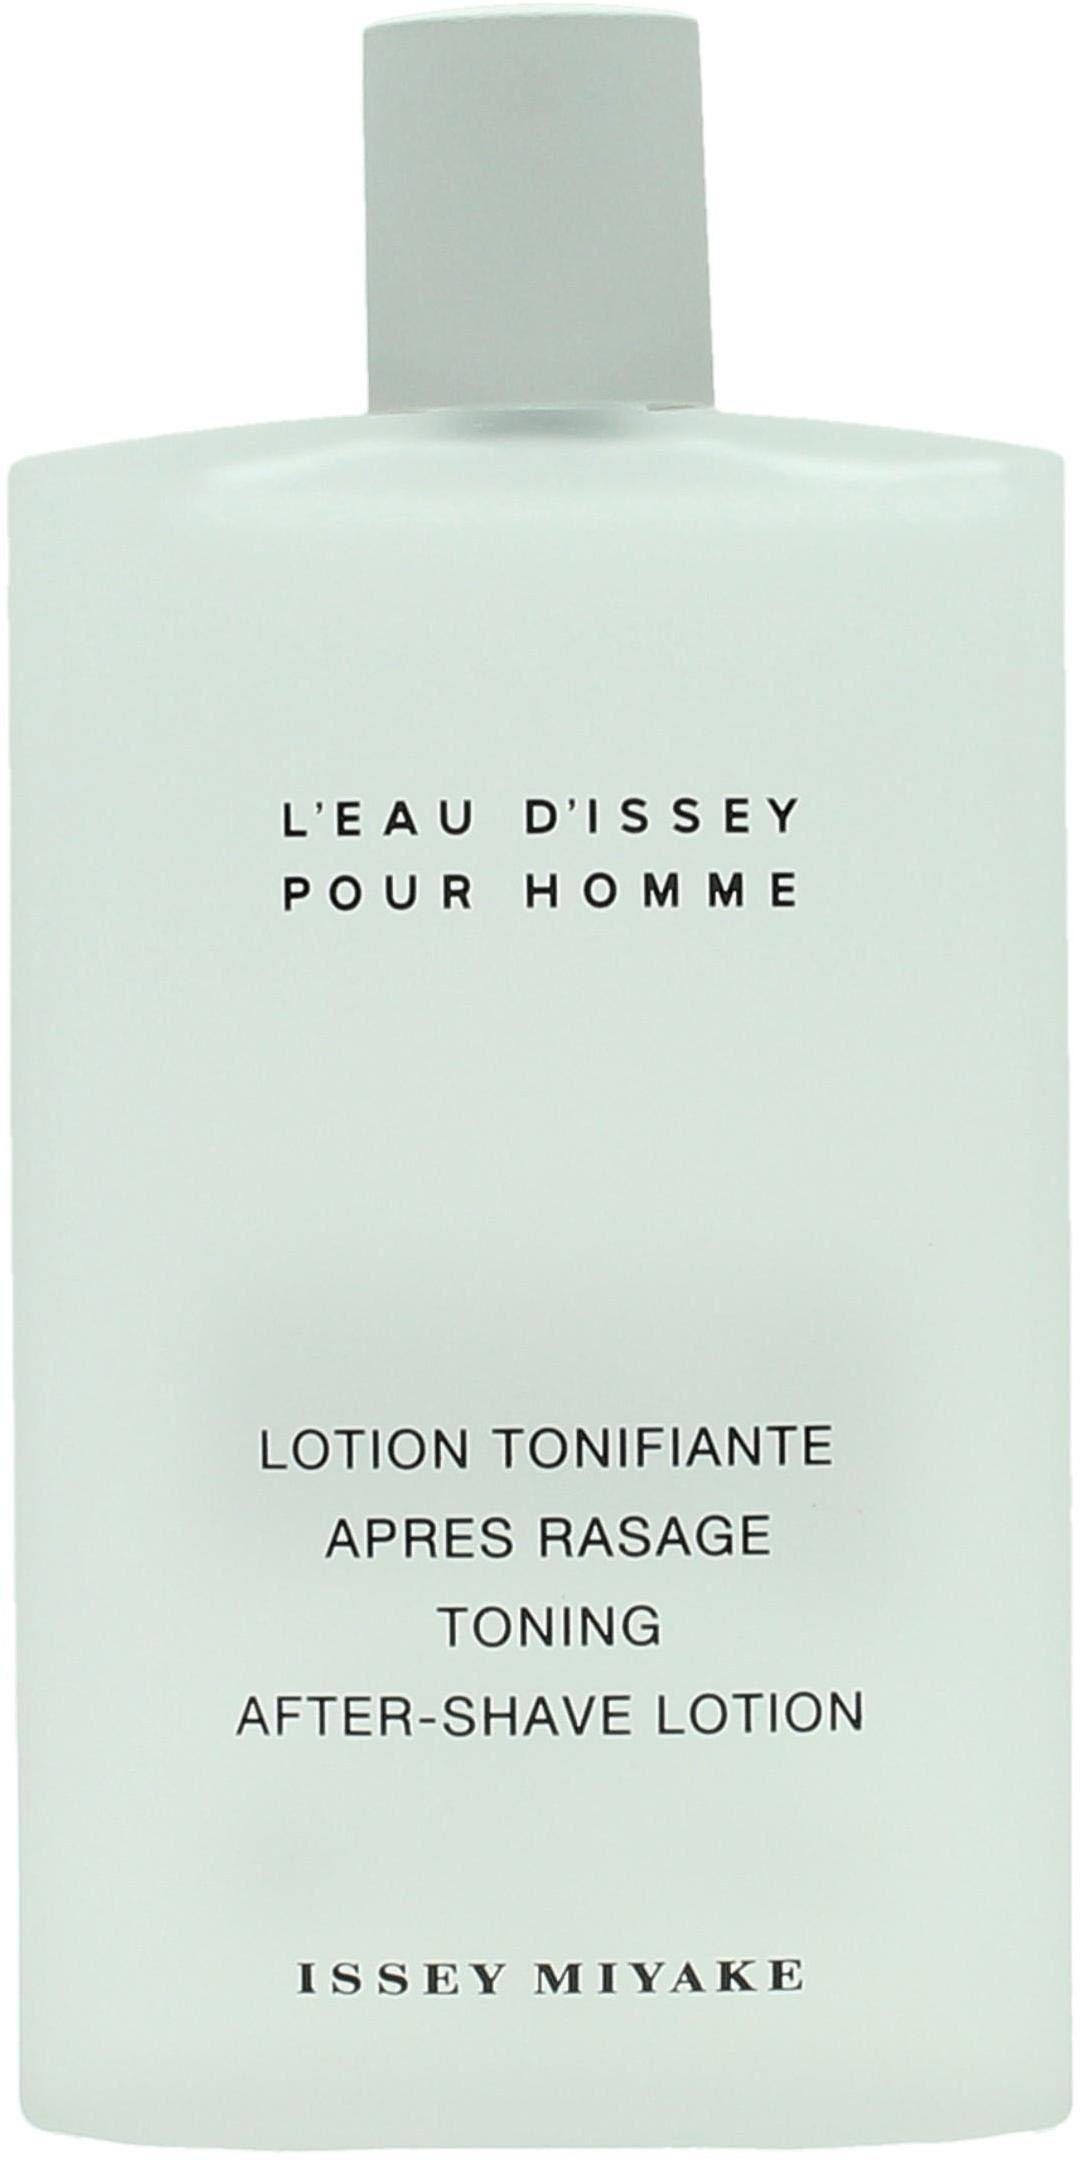 Issey Miyake After-Shave L'Eau D'Issey Pour Homme